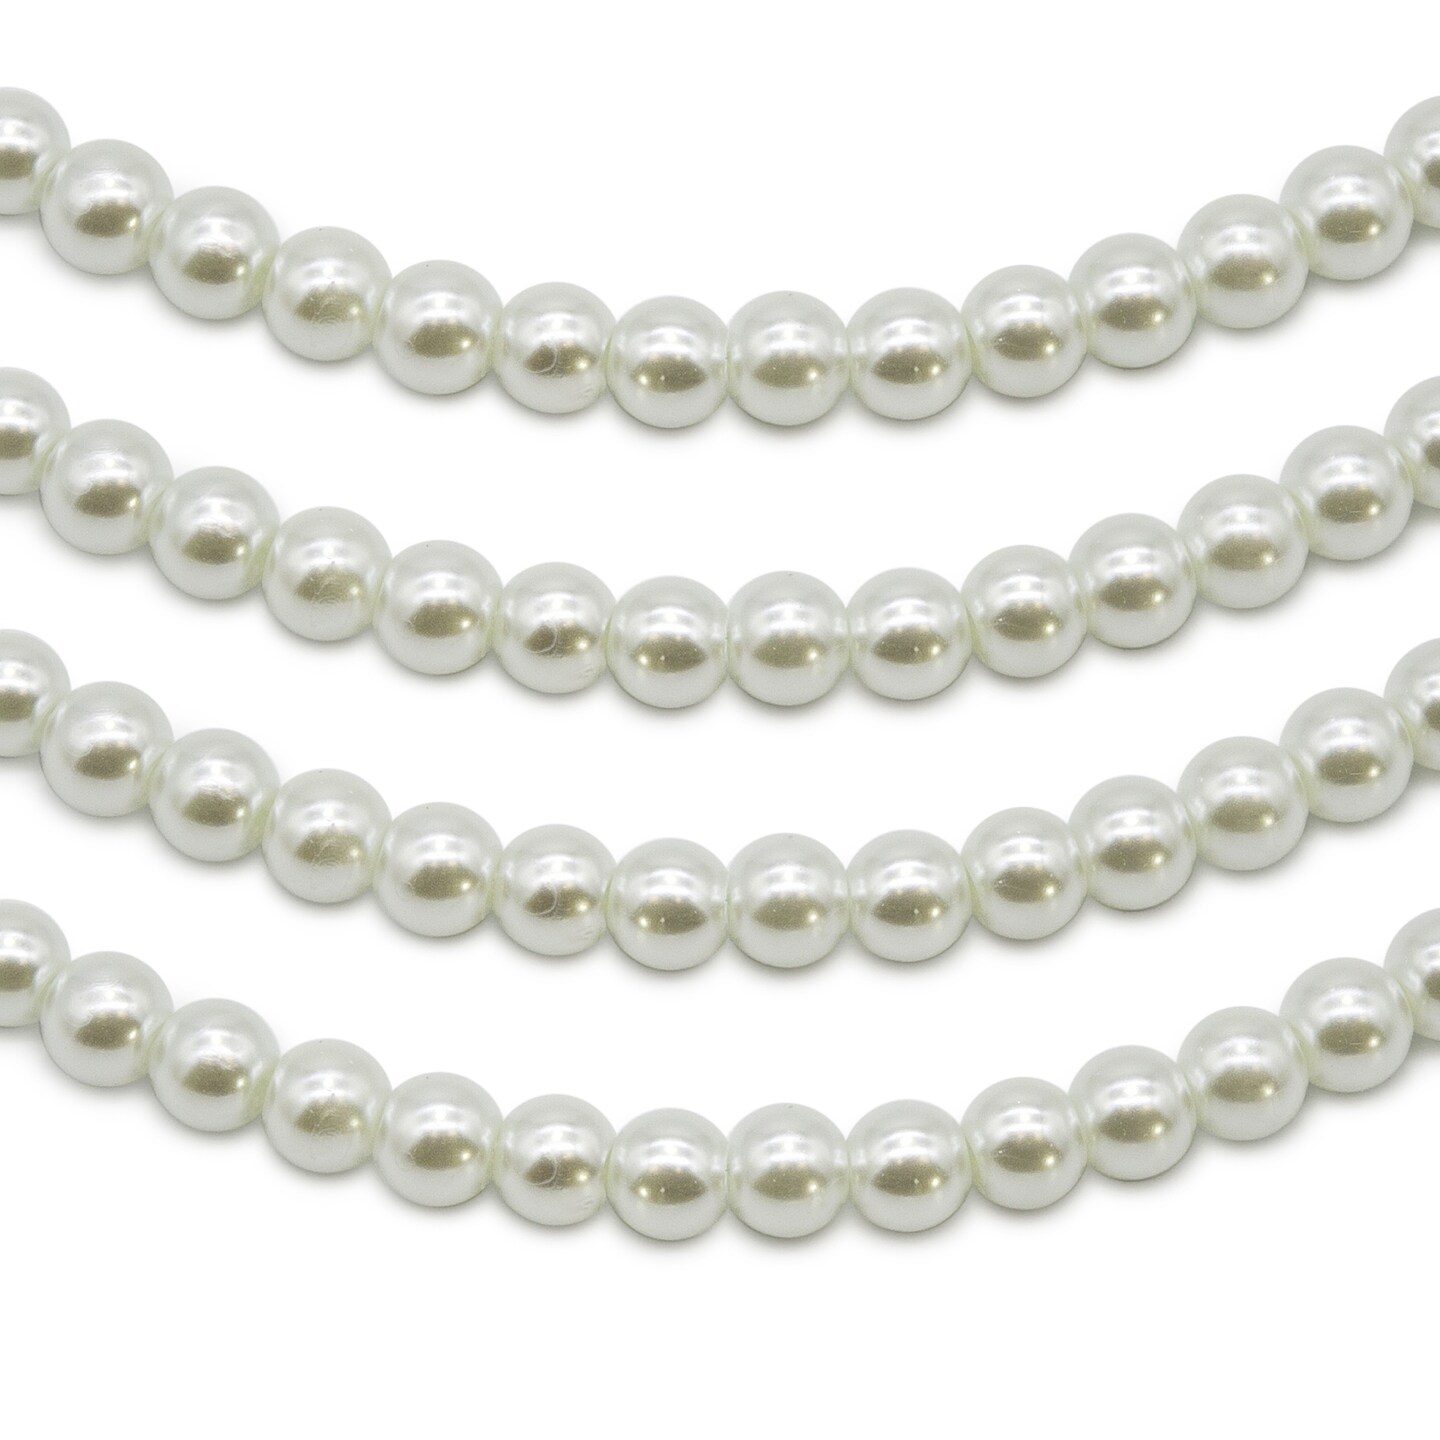 4 Strands of 6mm White Glass Pearl Beads on 30-Inch Strands